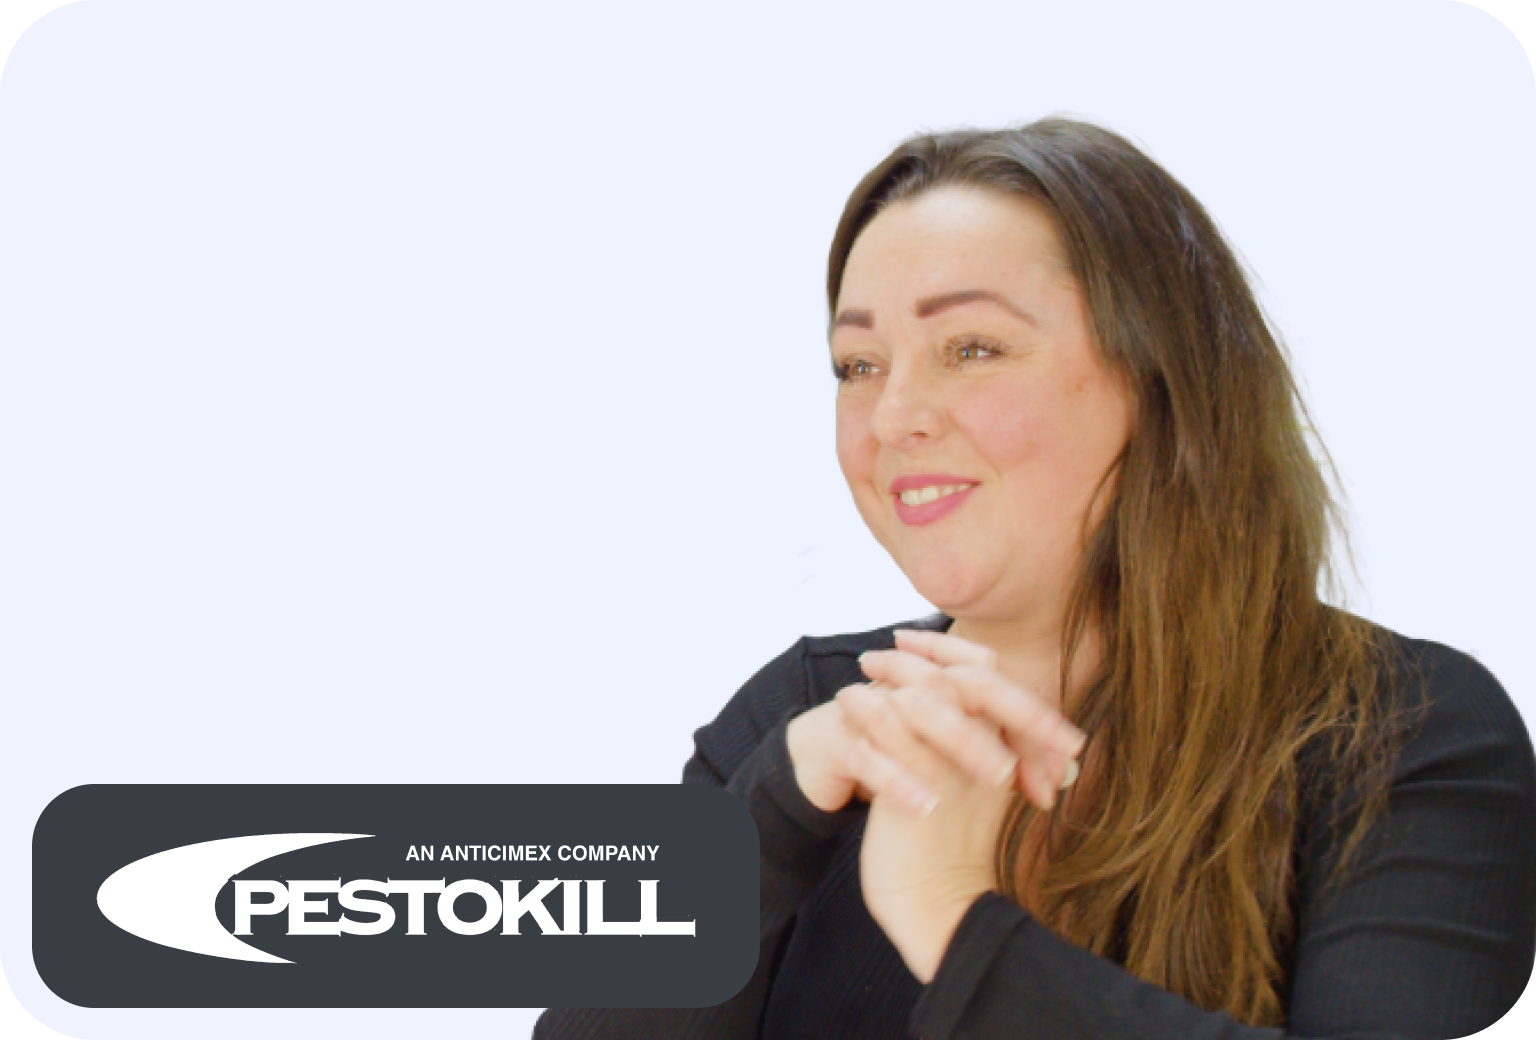 Pestokill improves collections with software solution Kolleno